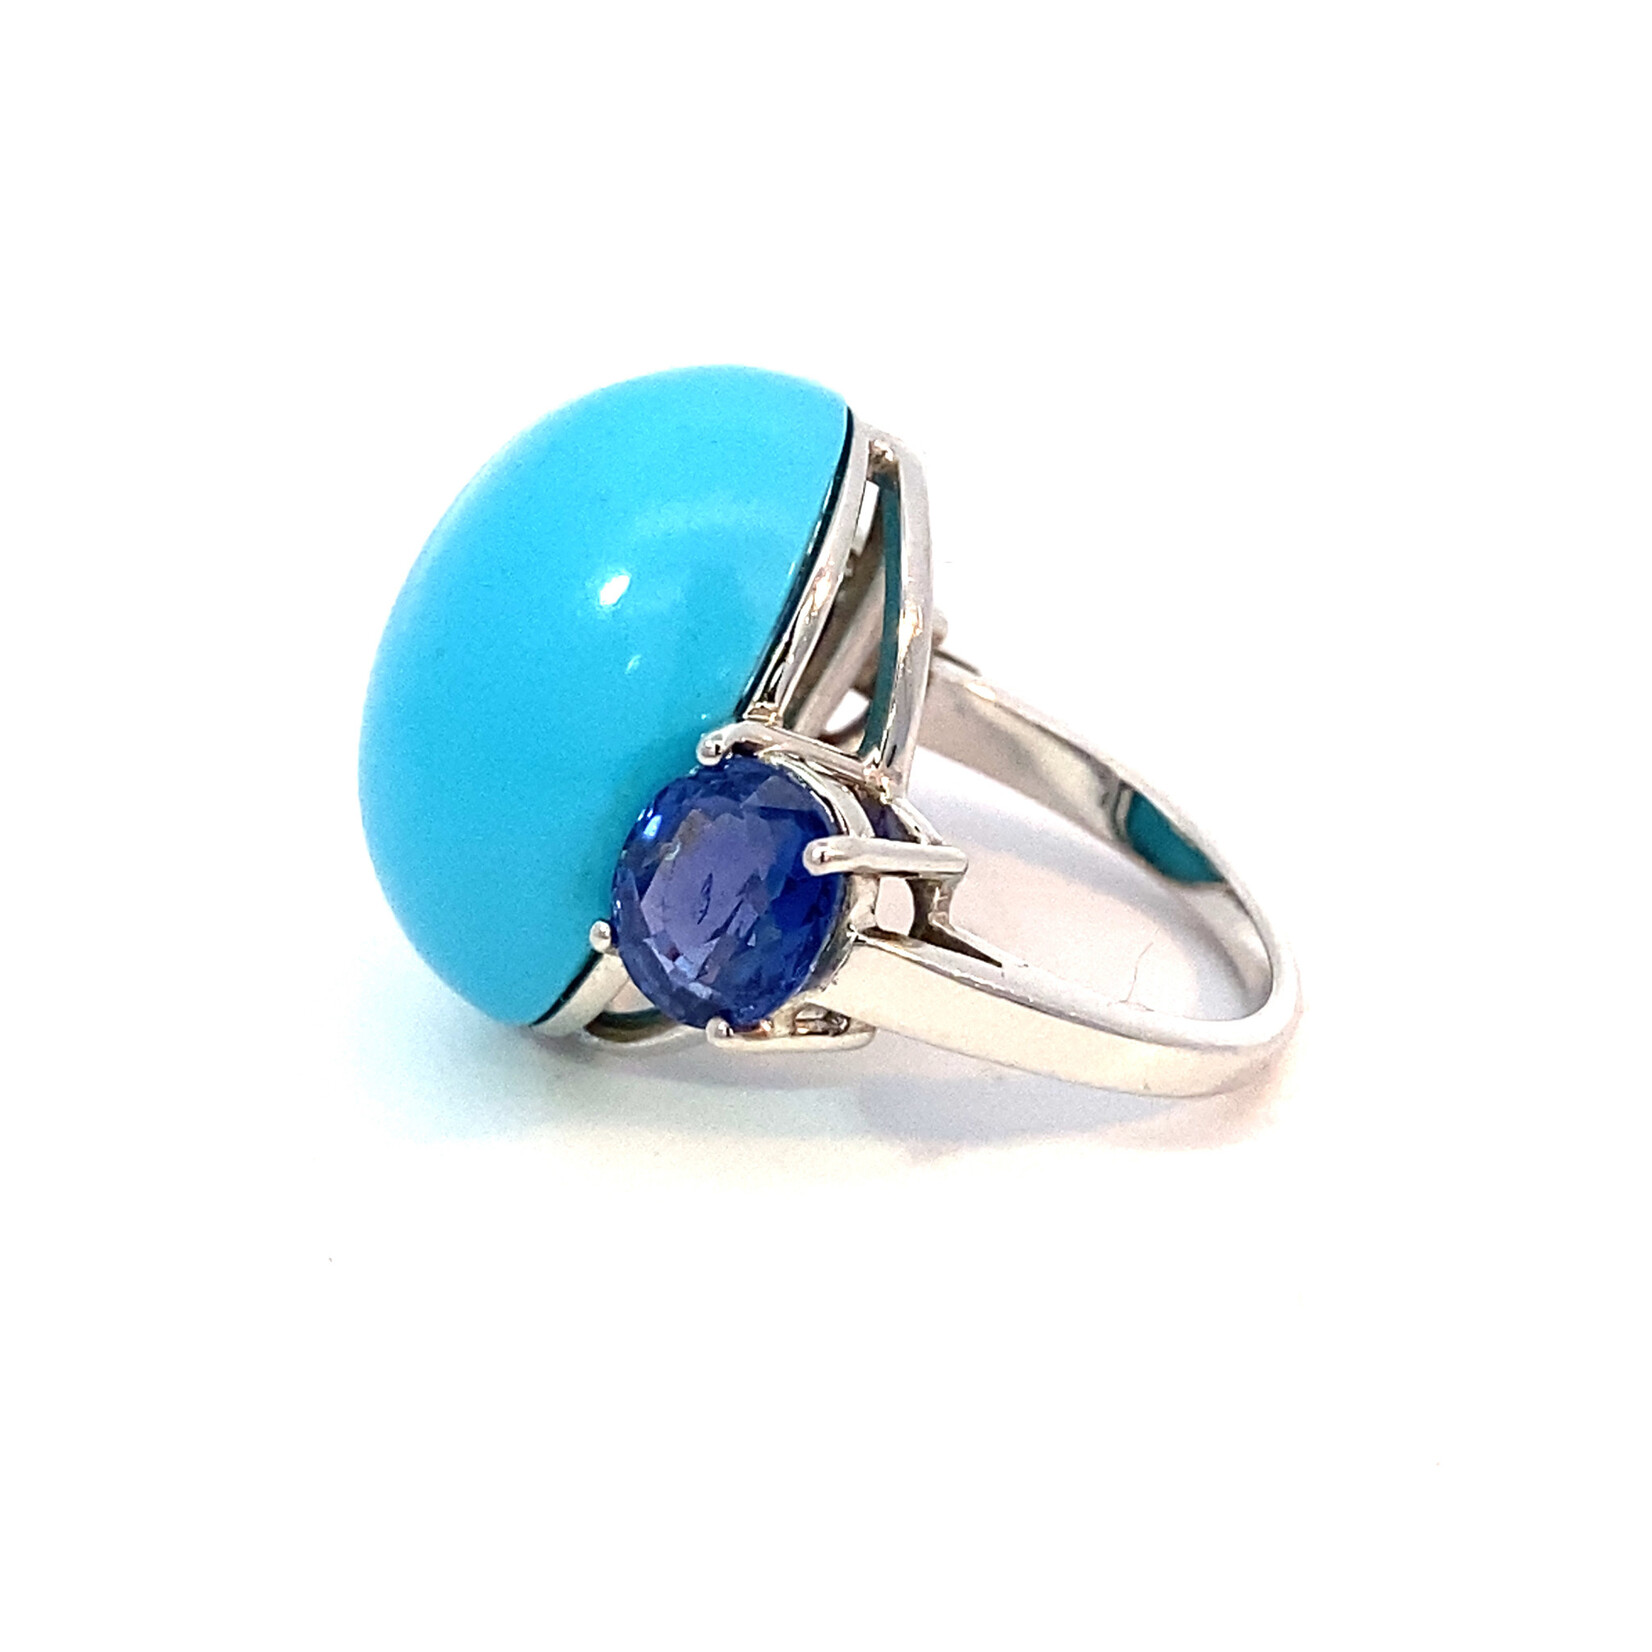 18K White Gold Oval Turquoise & Sapphire Ring size 5.5 "Sabbadini"